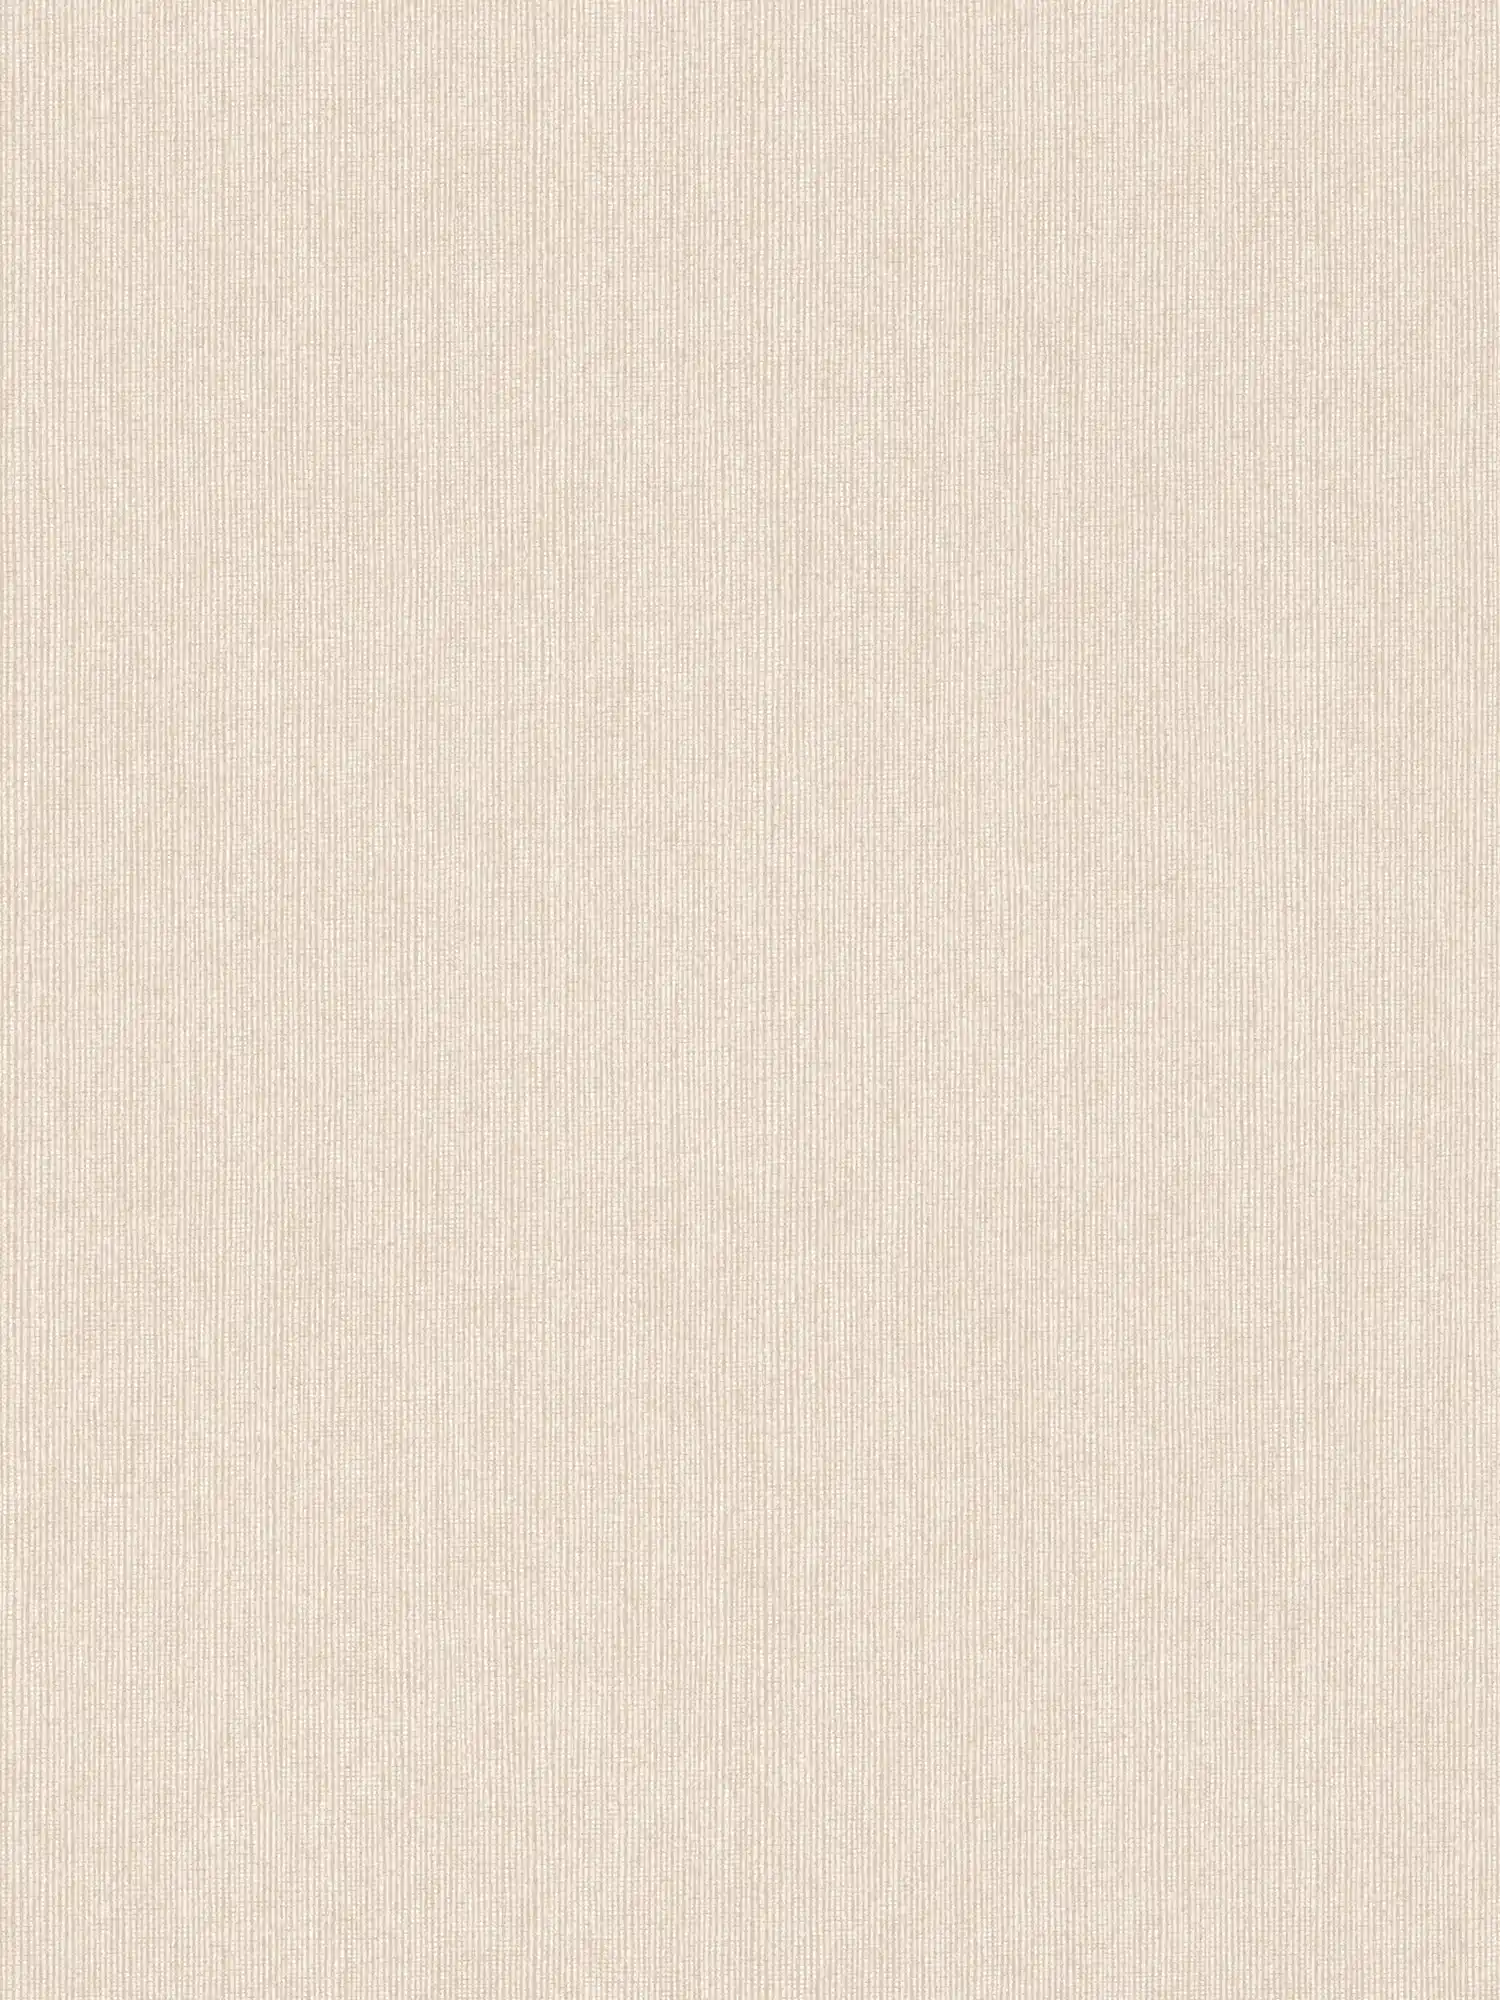 Light beige non-woven wallpaper with gloss effect & textile look - beige
